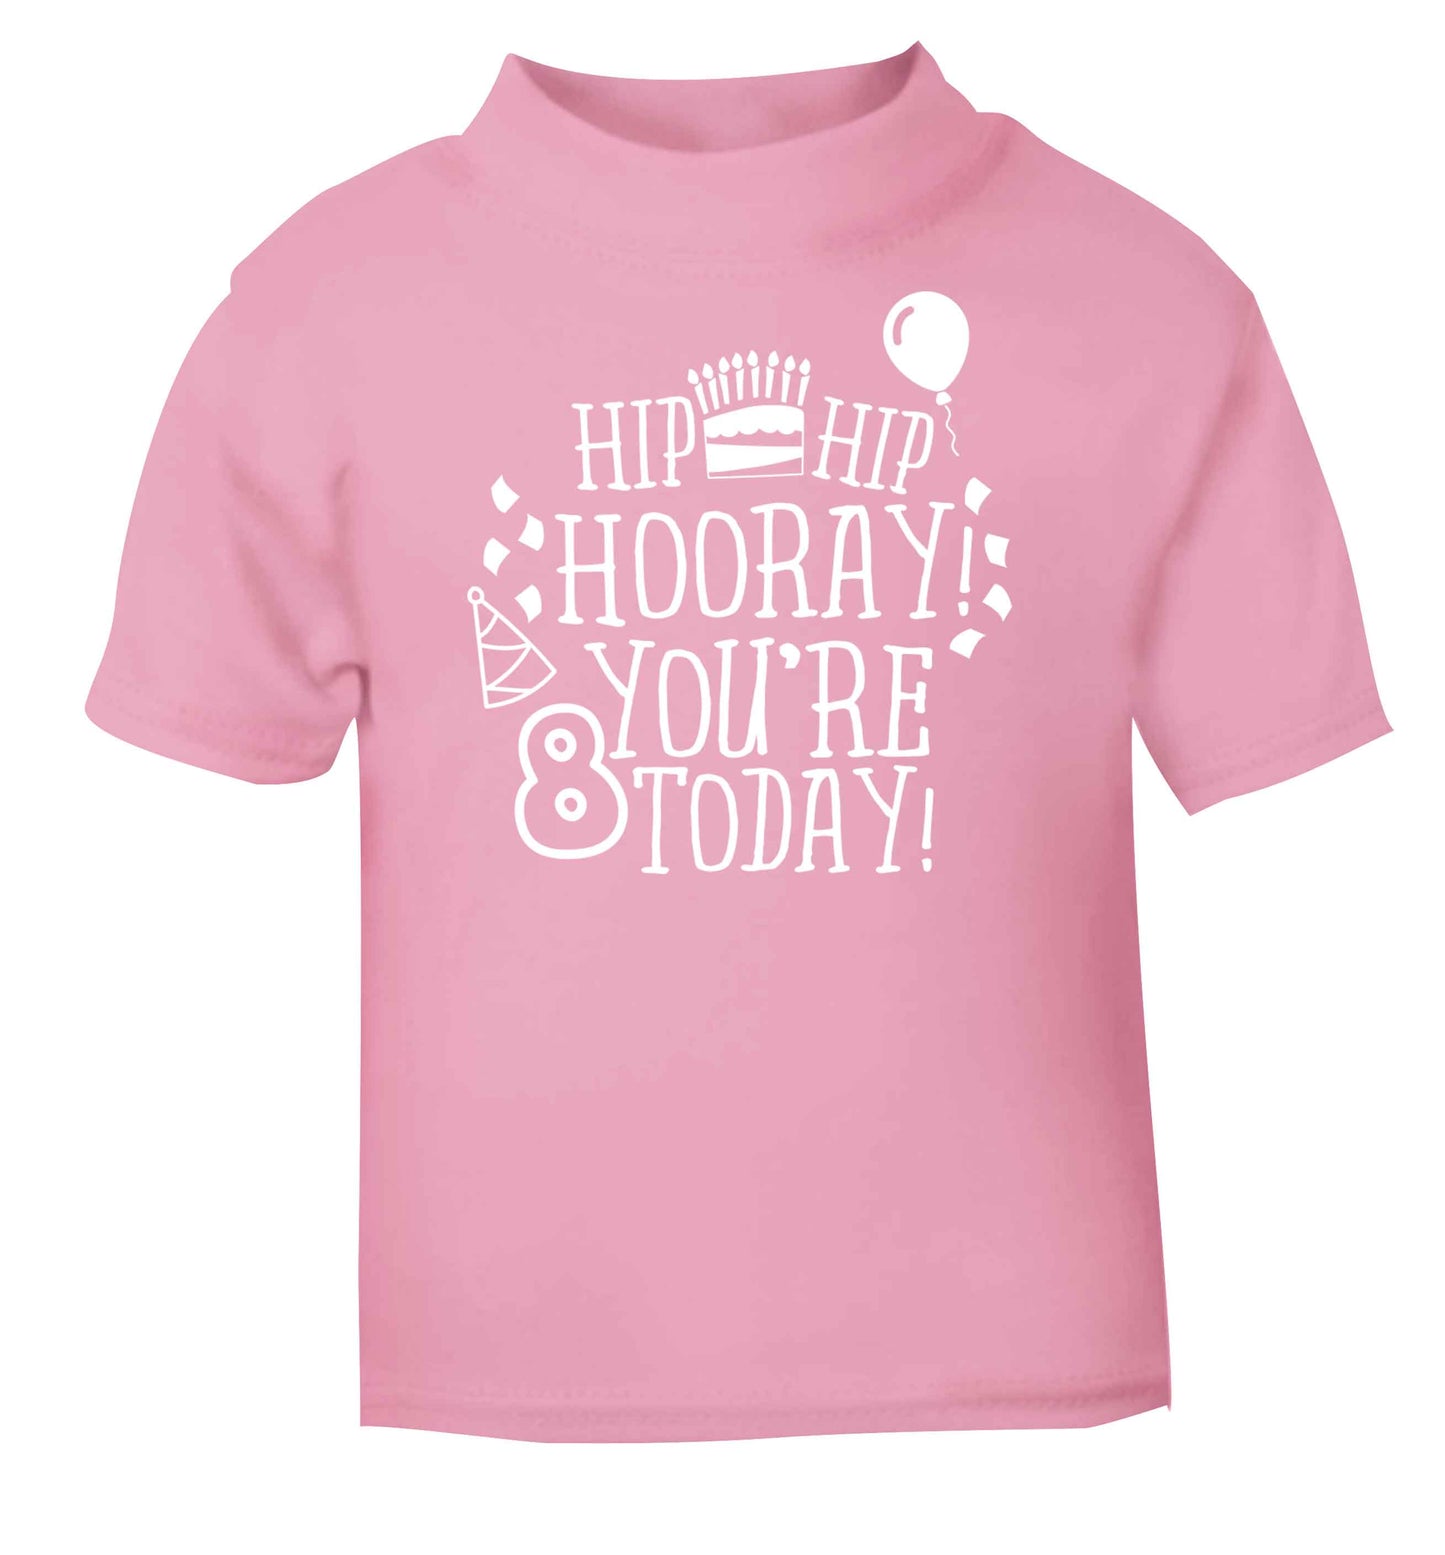 Hip hip hooray you're 8 today! light pink baby toddler Tshirt 2 Years